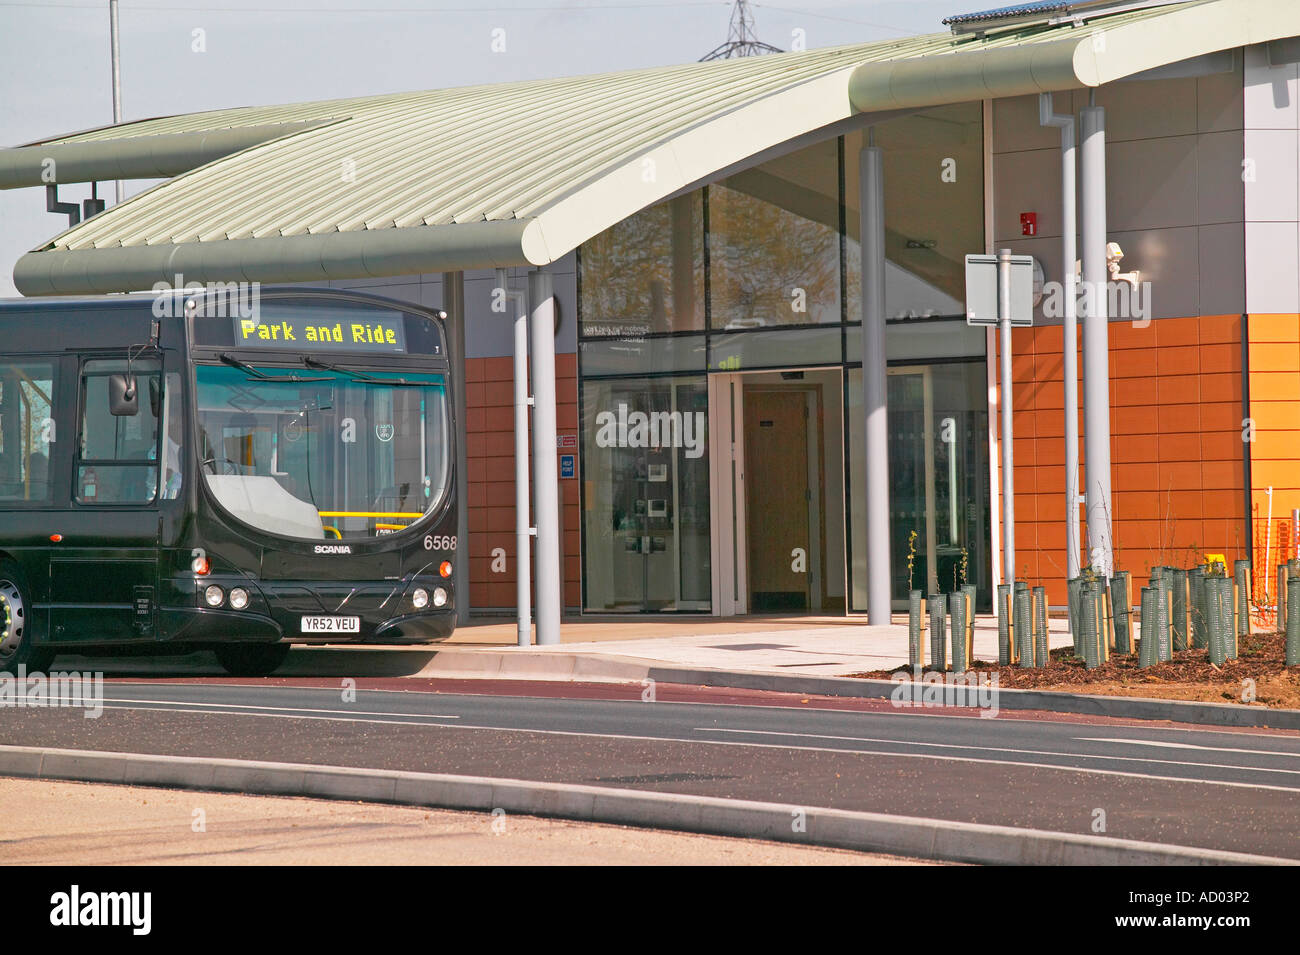 Park and Ride chelmsford bus Banque D'Images